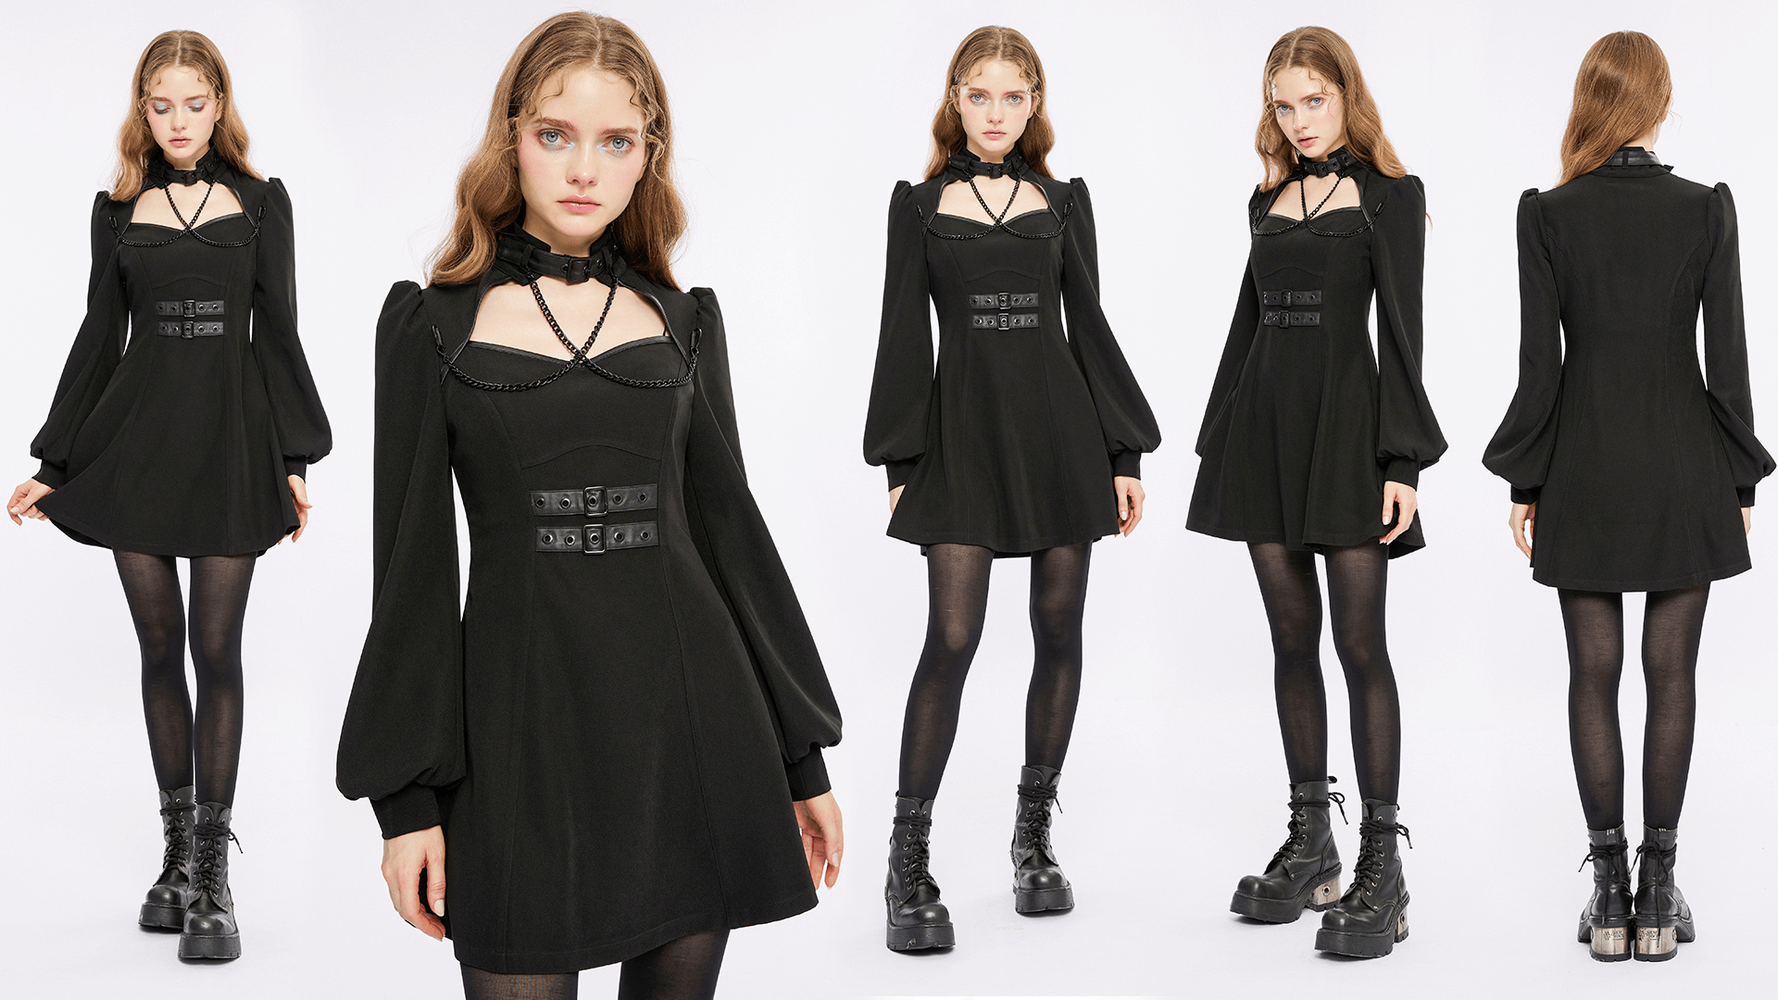 Punk Rave Black Gothic Techwear Dress with Chain and Clasps